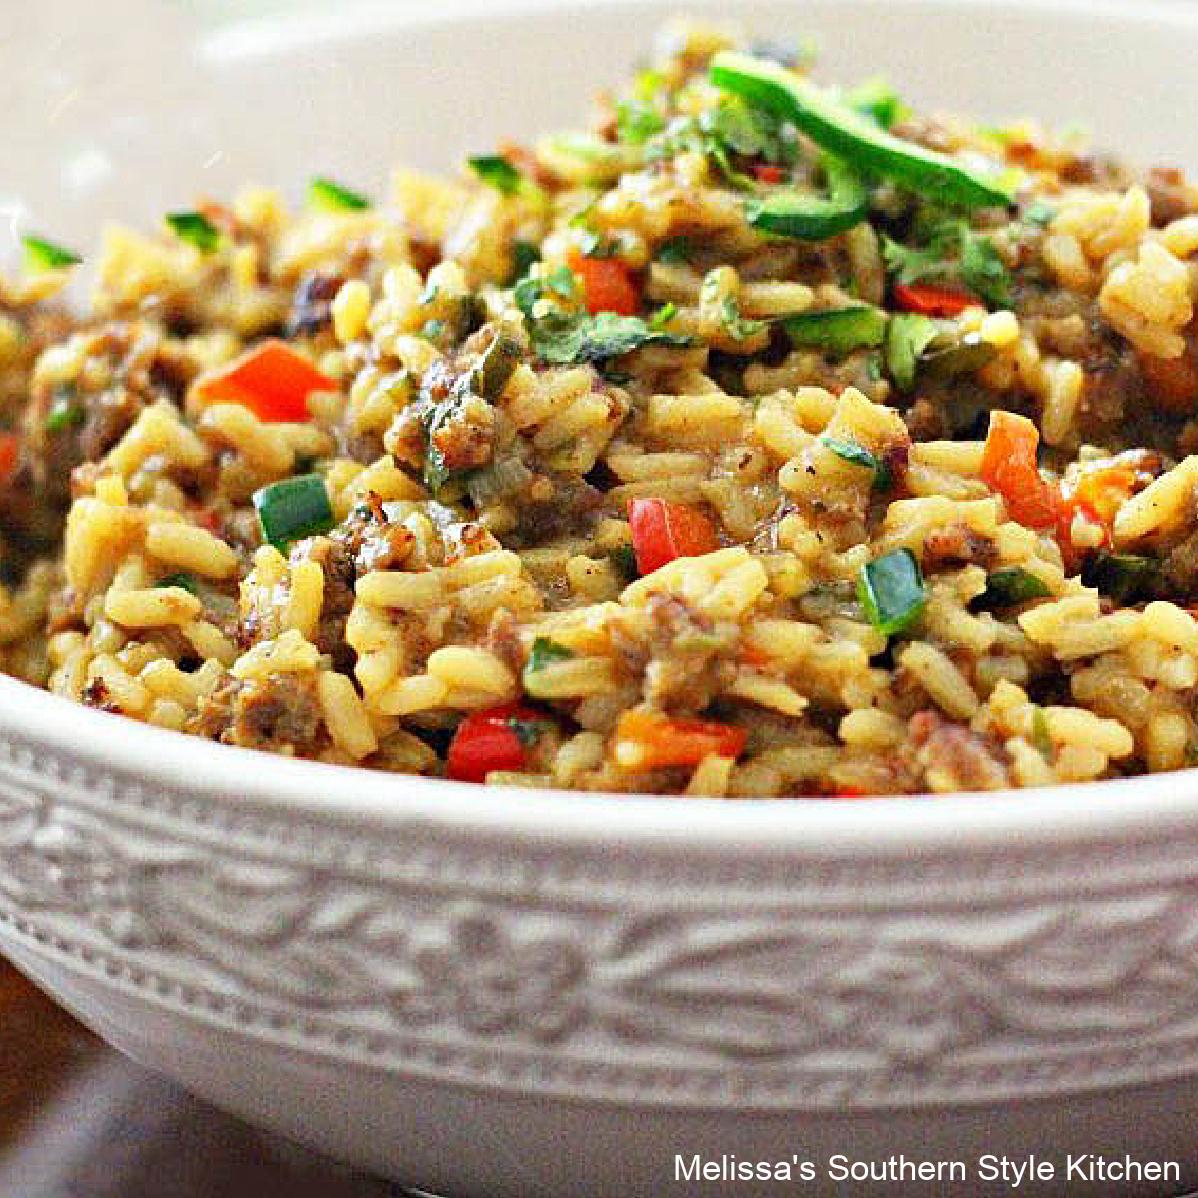  Creamy, rich textures – this Southern rice recipe will make you feel right at home.